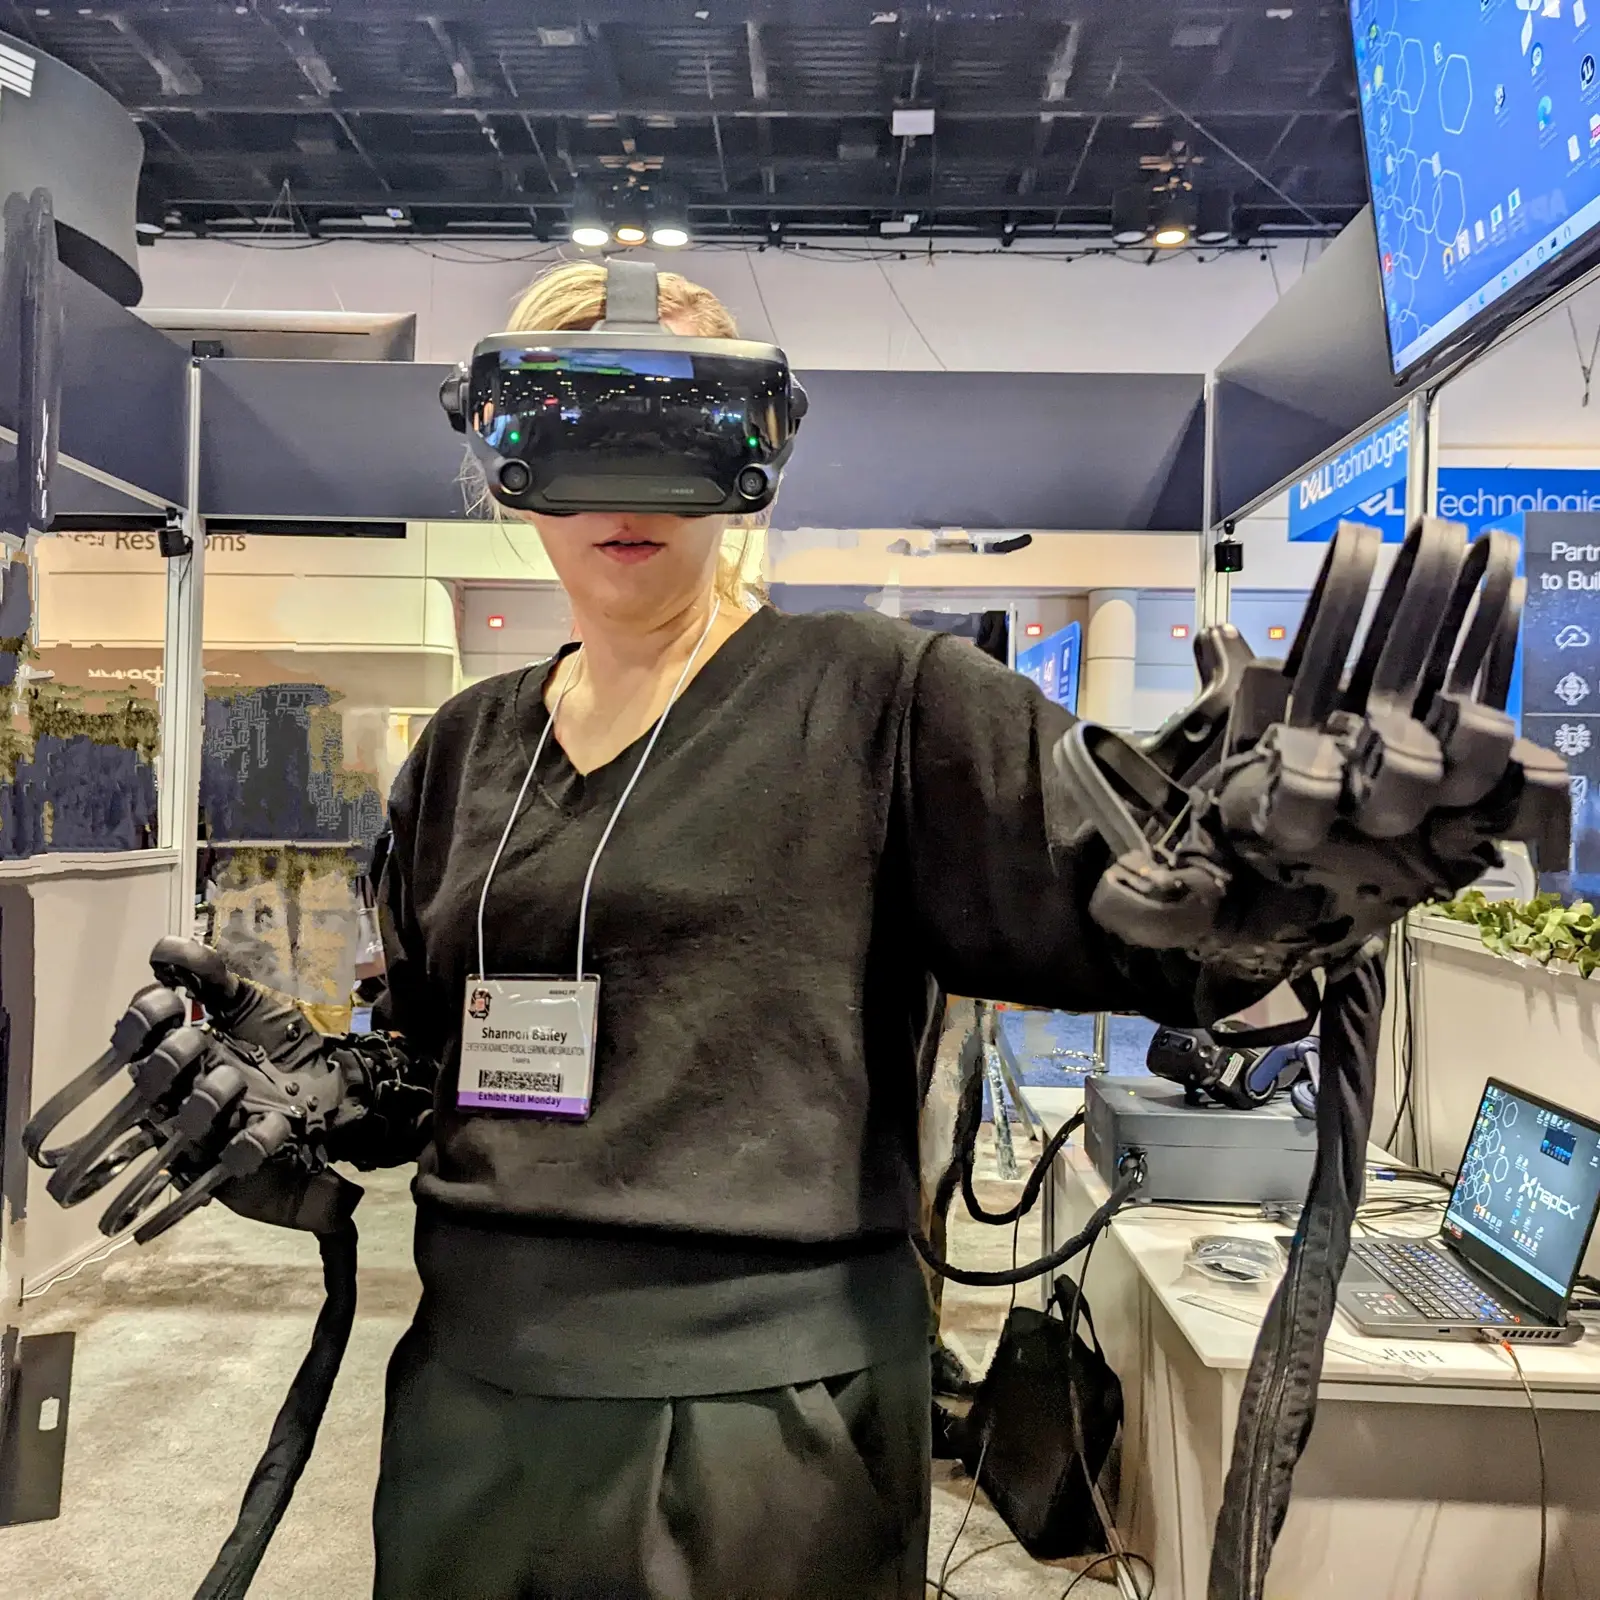 CAMLS A person is wearing a VR headset and haptic gloves, standing in a tech expo booth. They appear to be engaged in a virtual reality experience, with various electronic equipment and display monitors visible in the background.